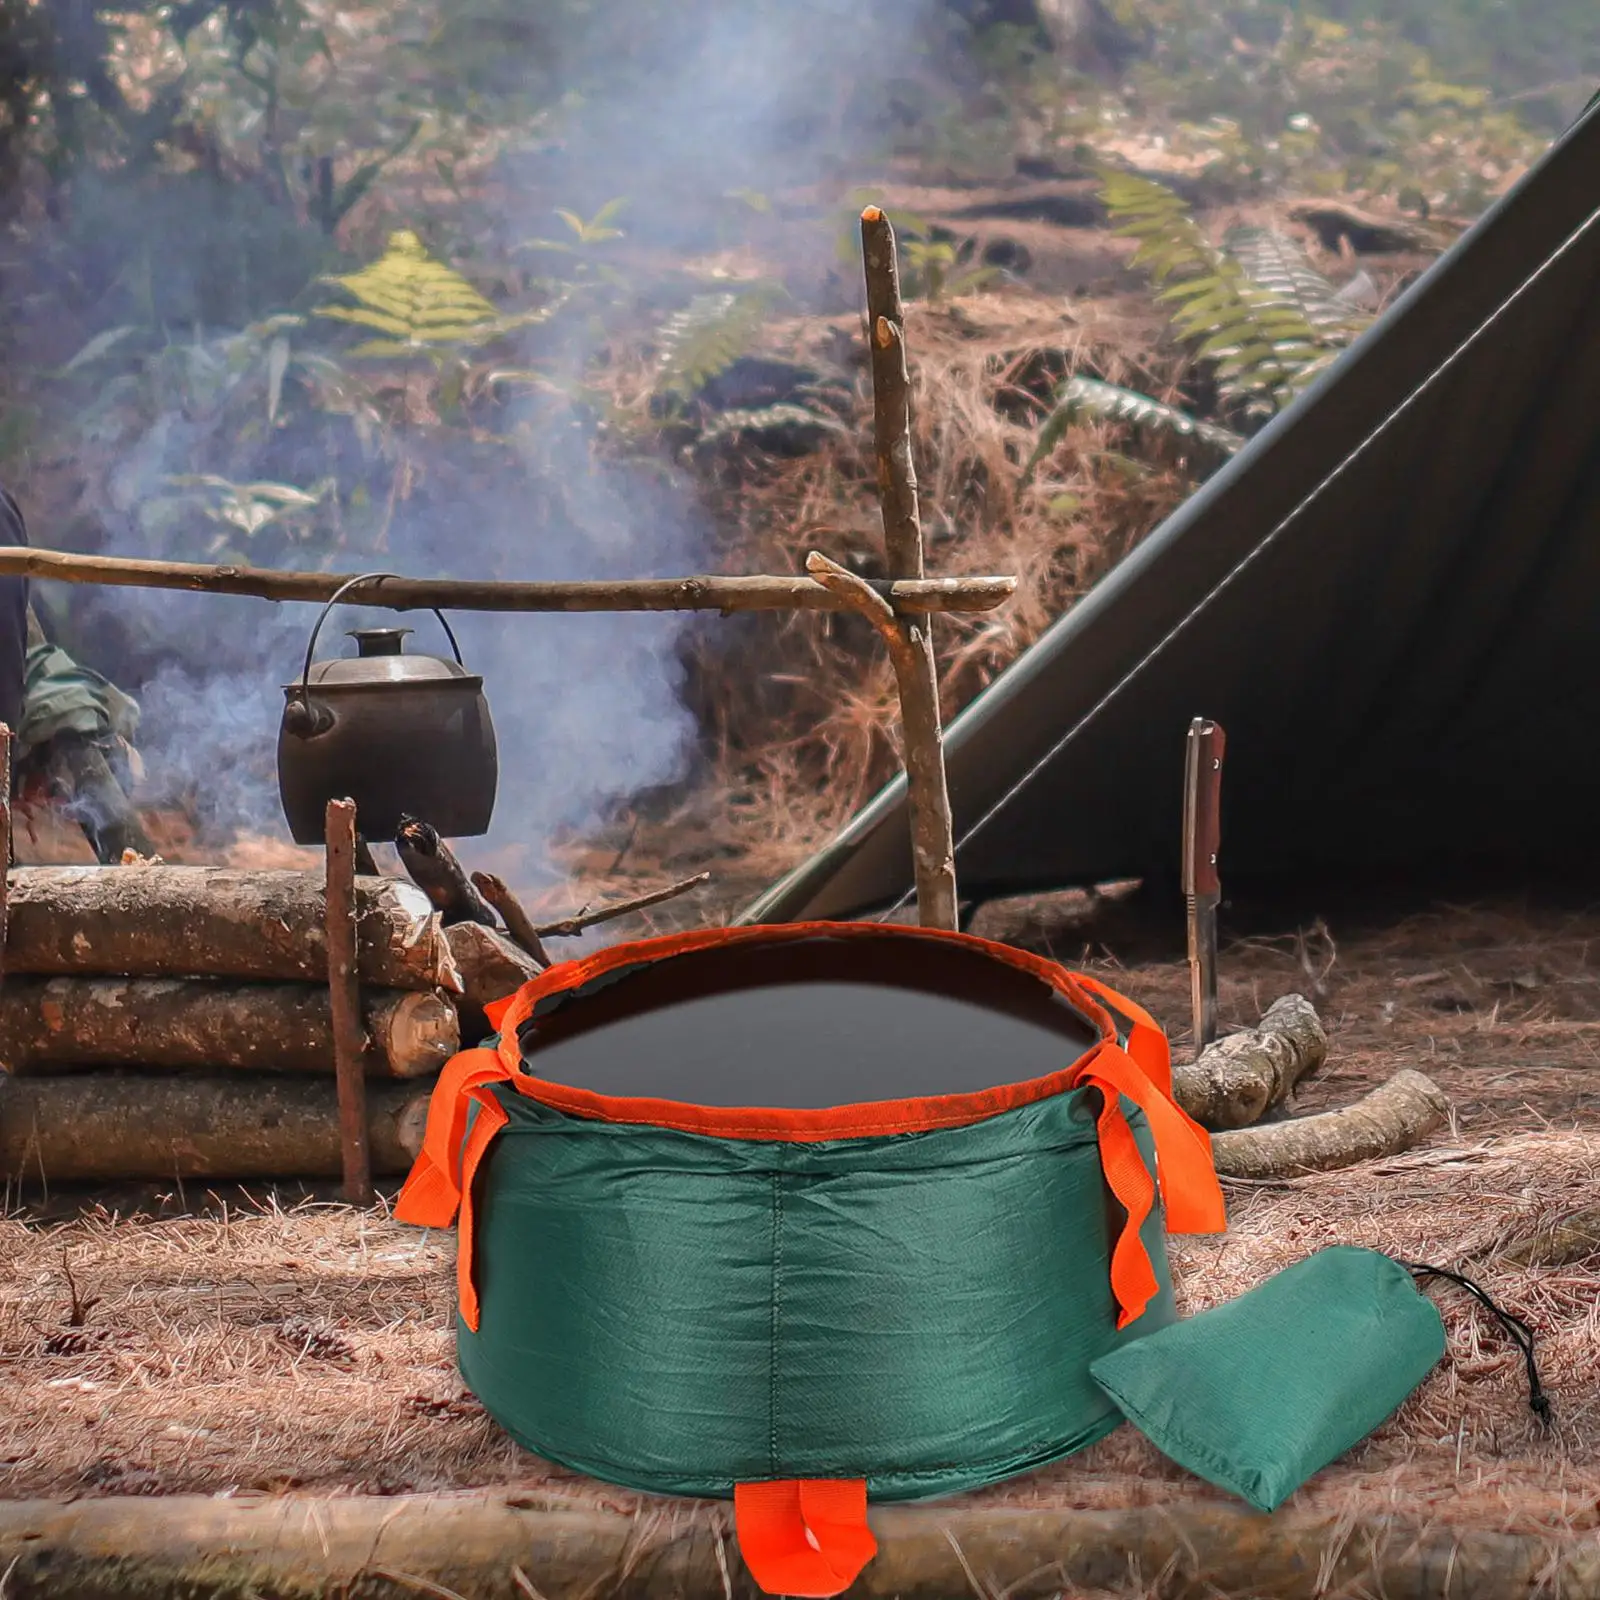 Folding Collapsible Bucket Foldable with Carry Bag Camping Outdoor Caravan